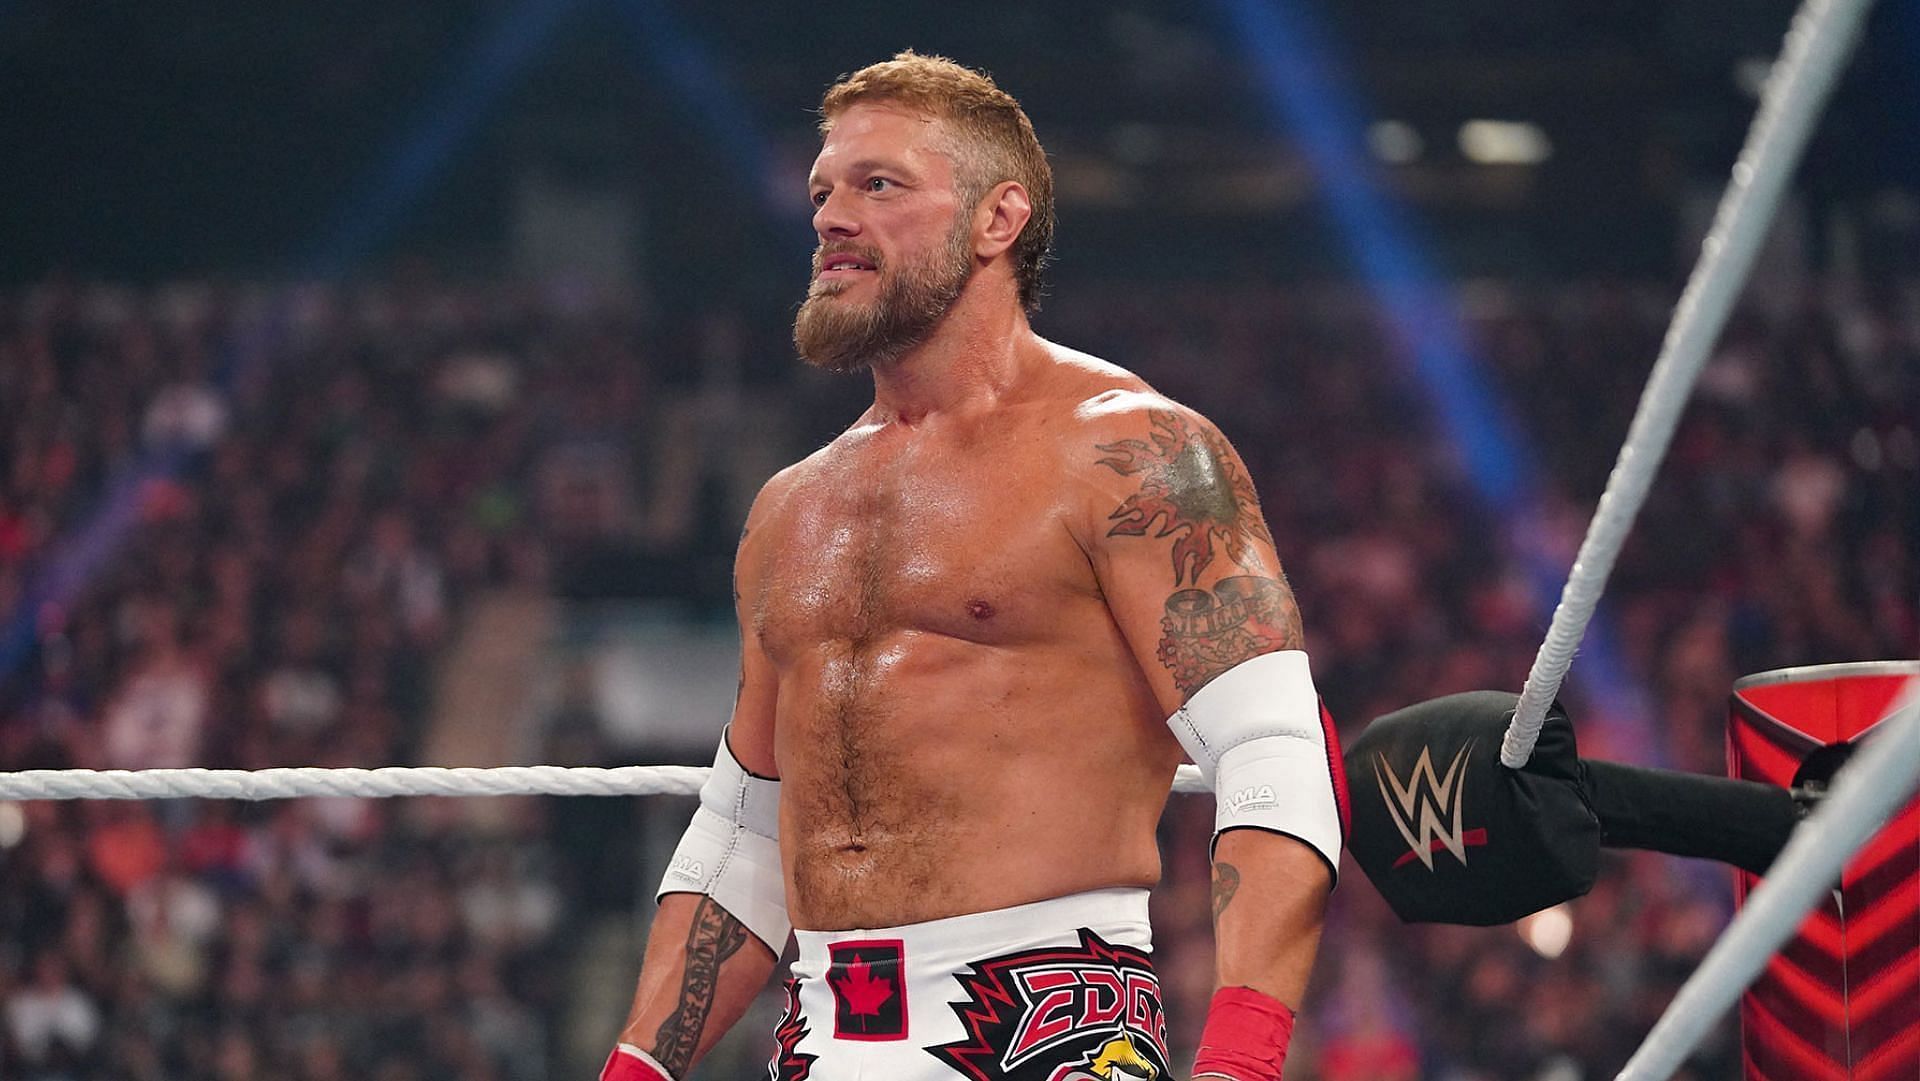 Edge is removed from WWE